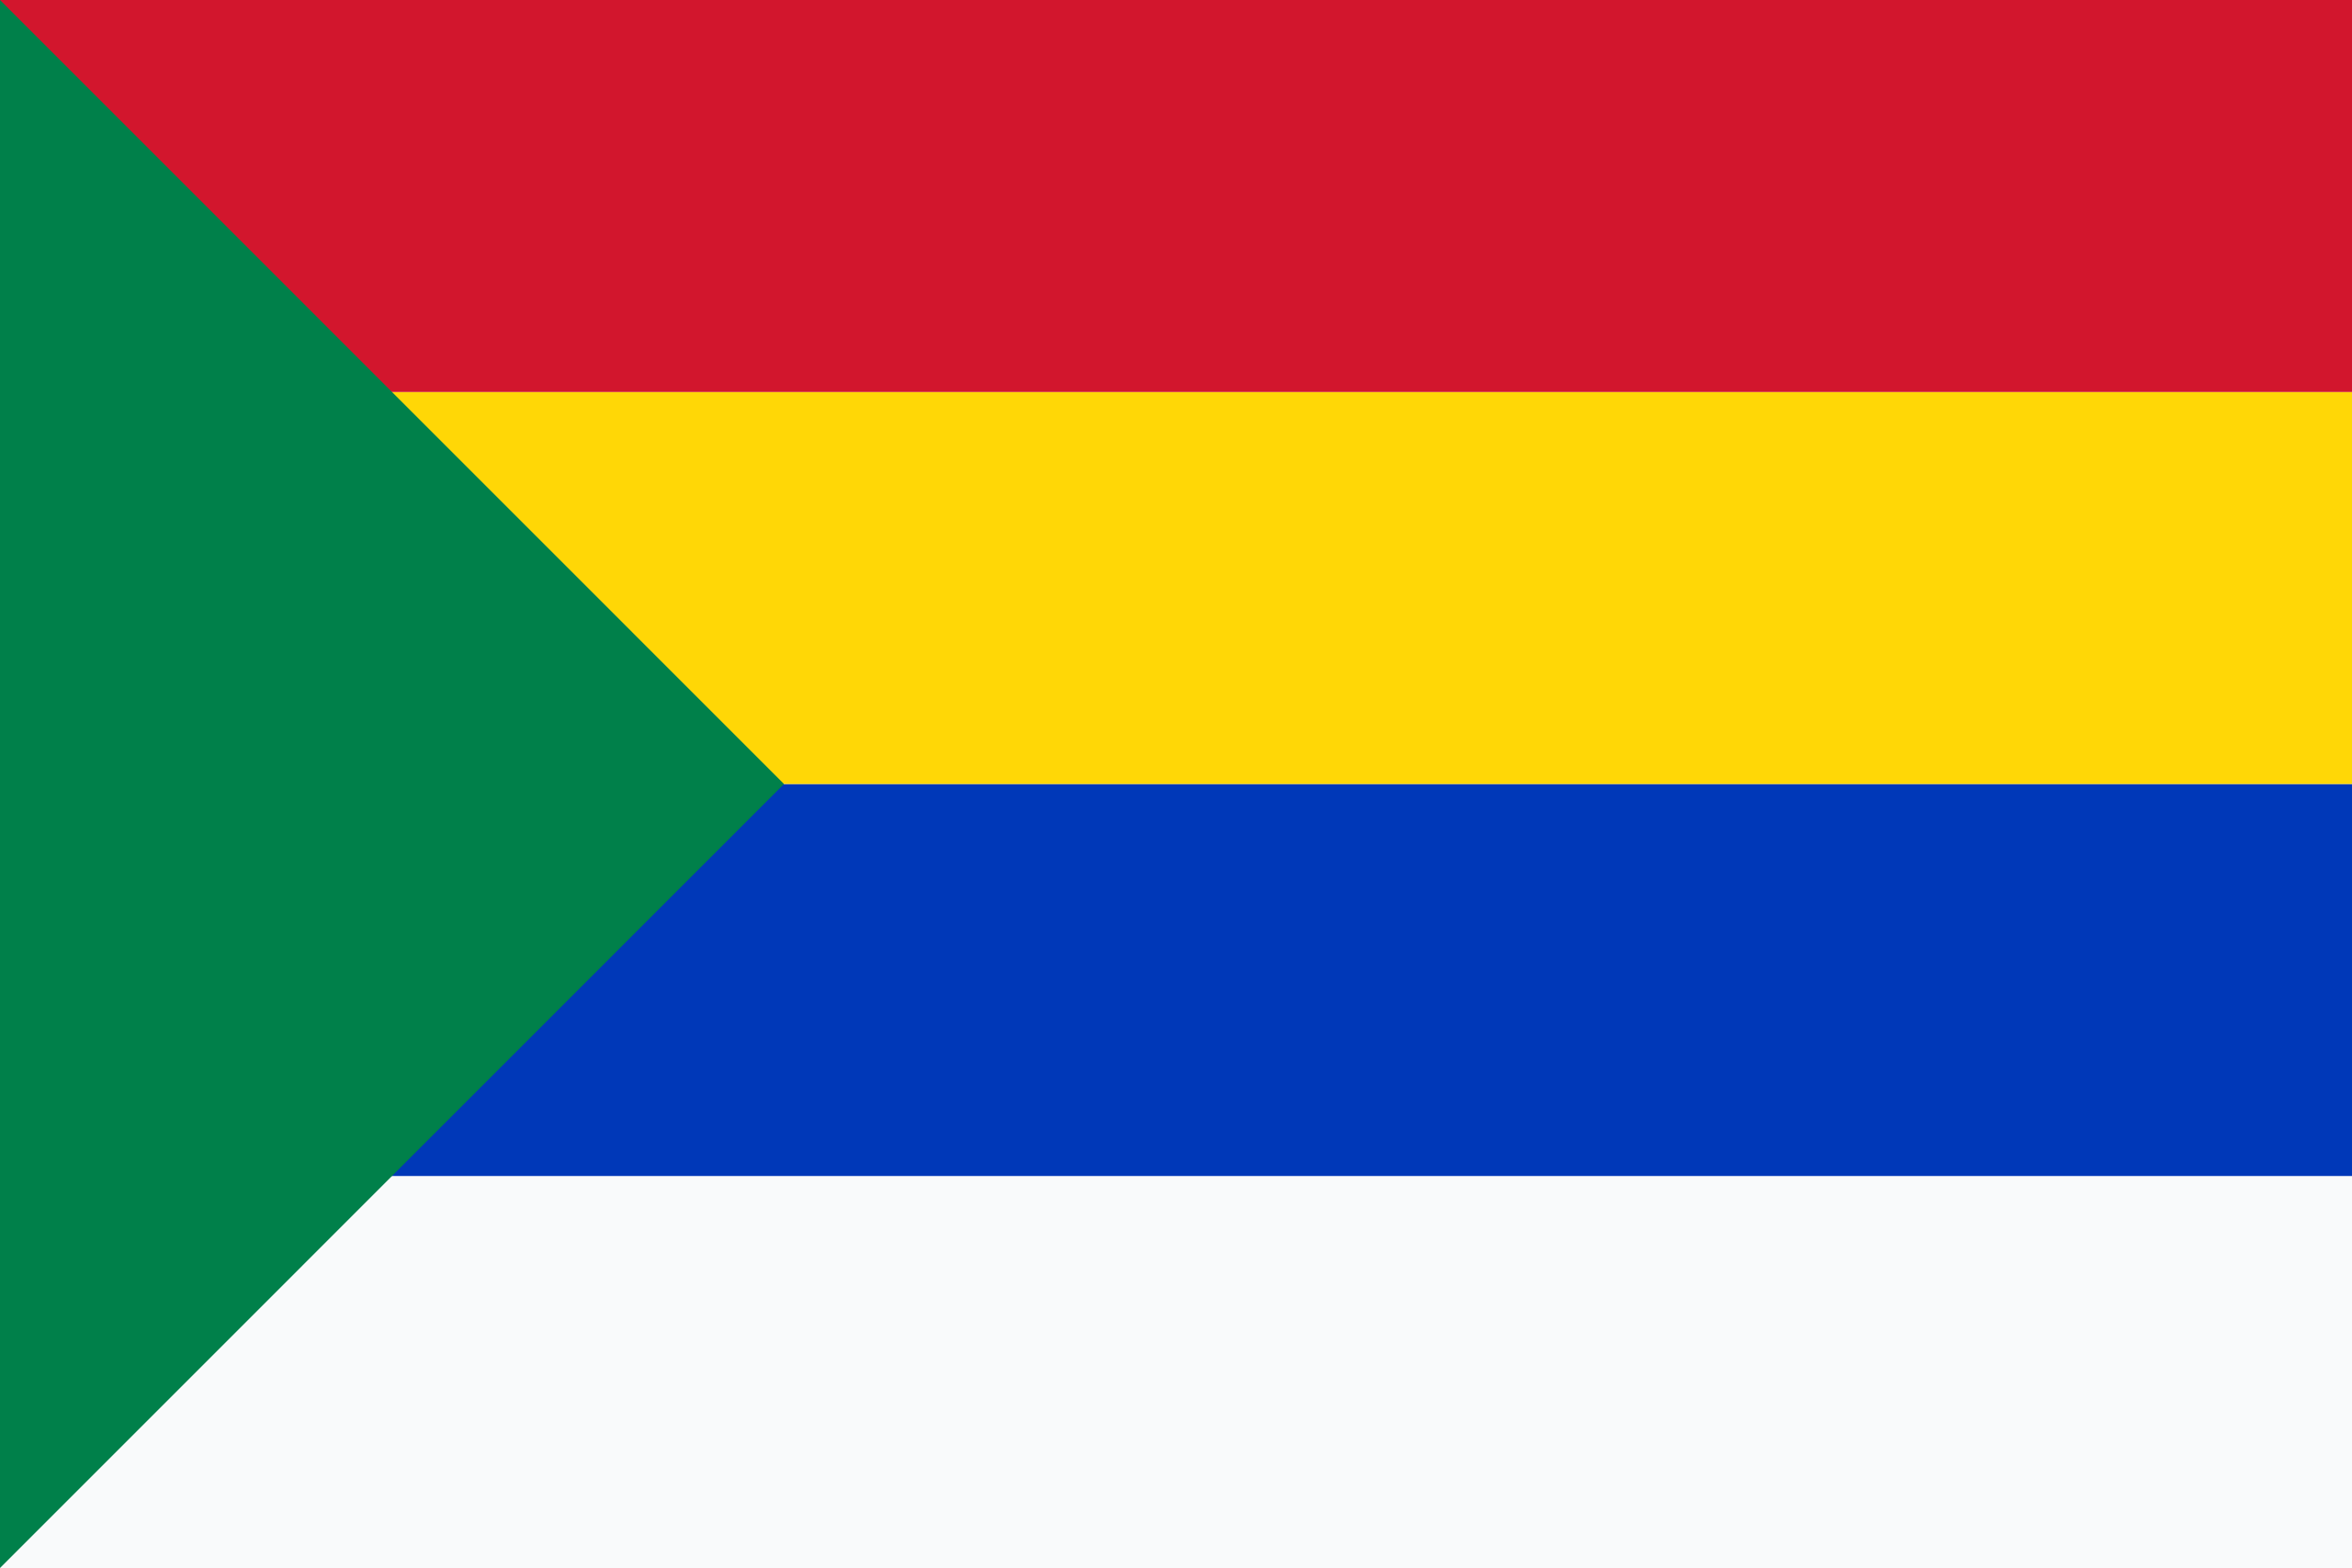 File:Syria-flag-changes.svg - Wikipedia